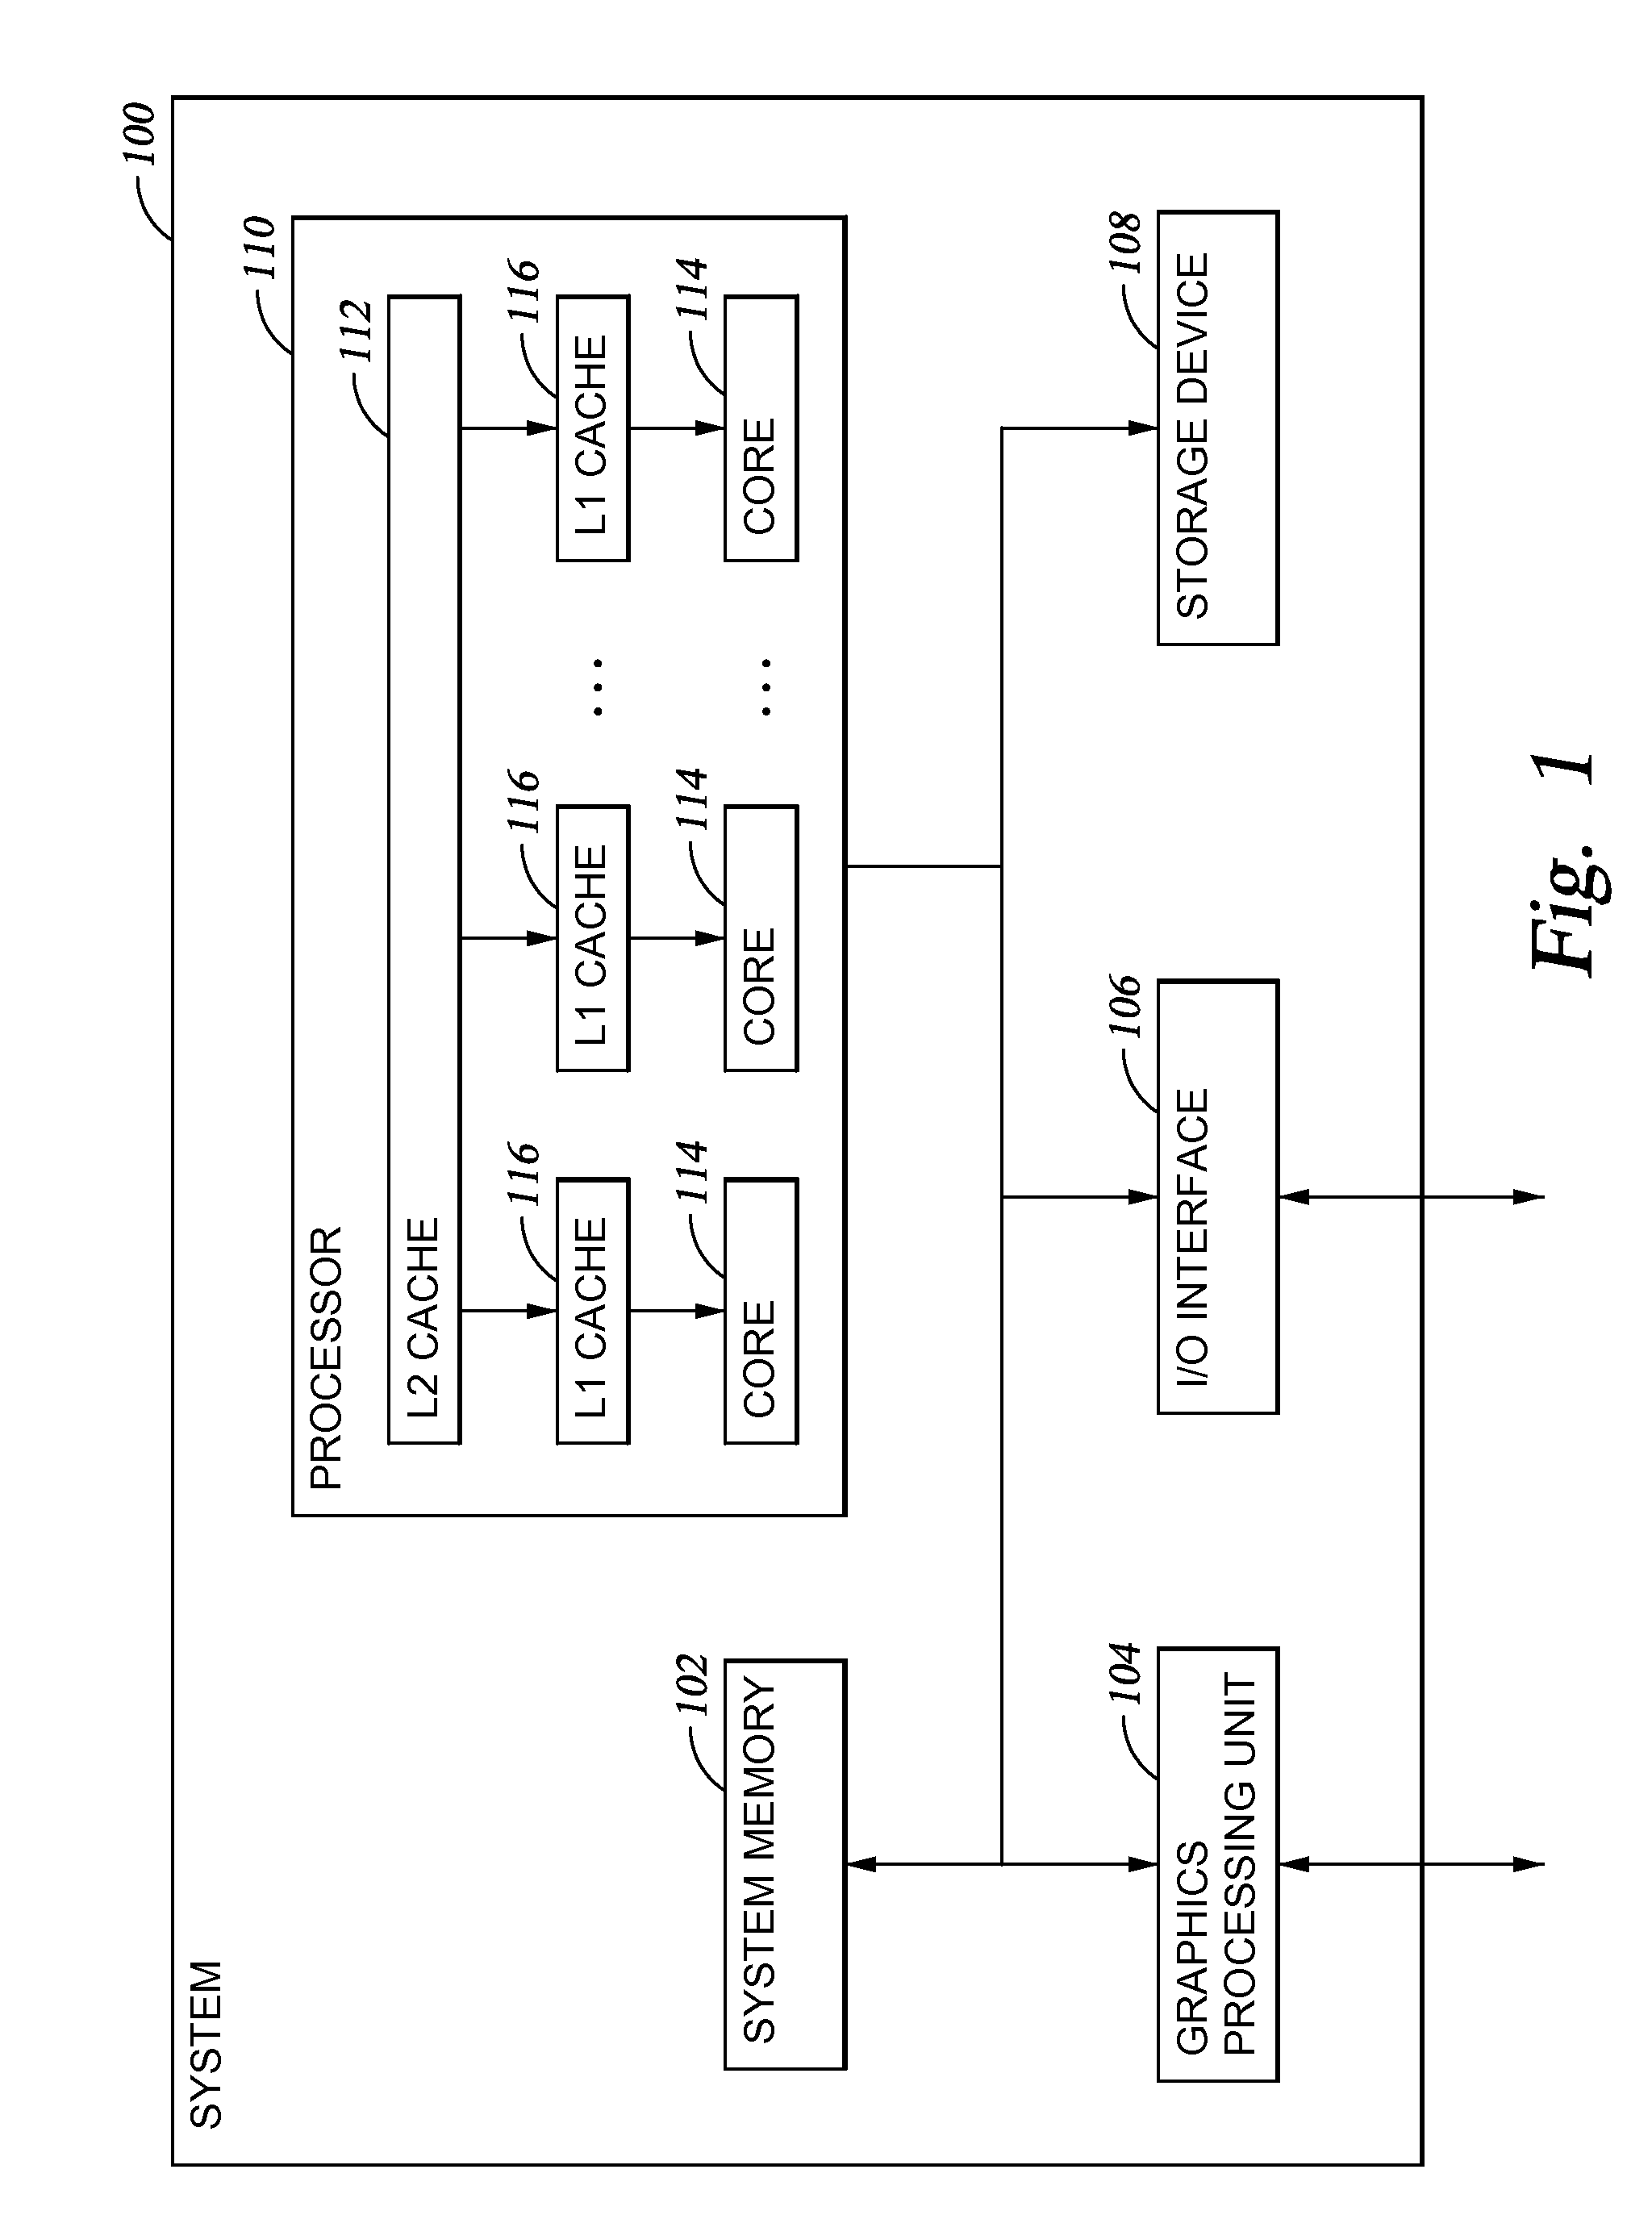 Design structure for a mechanism to minimize unscheduled d-cache miss pipeline stalls